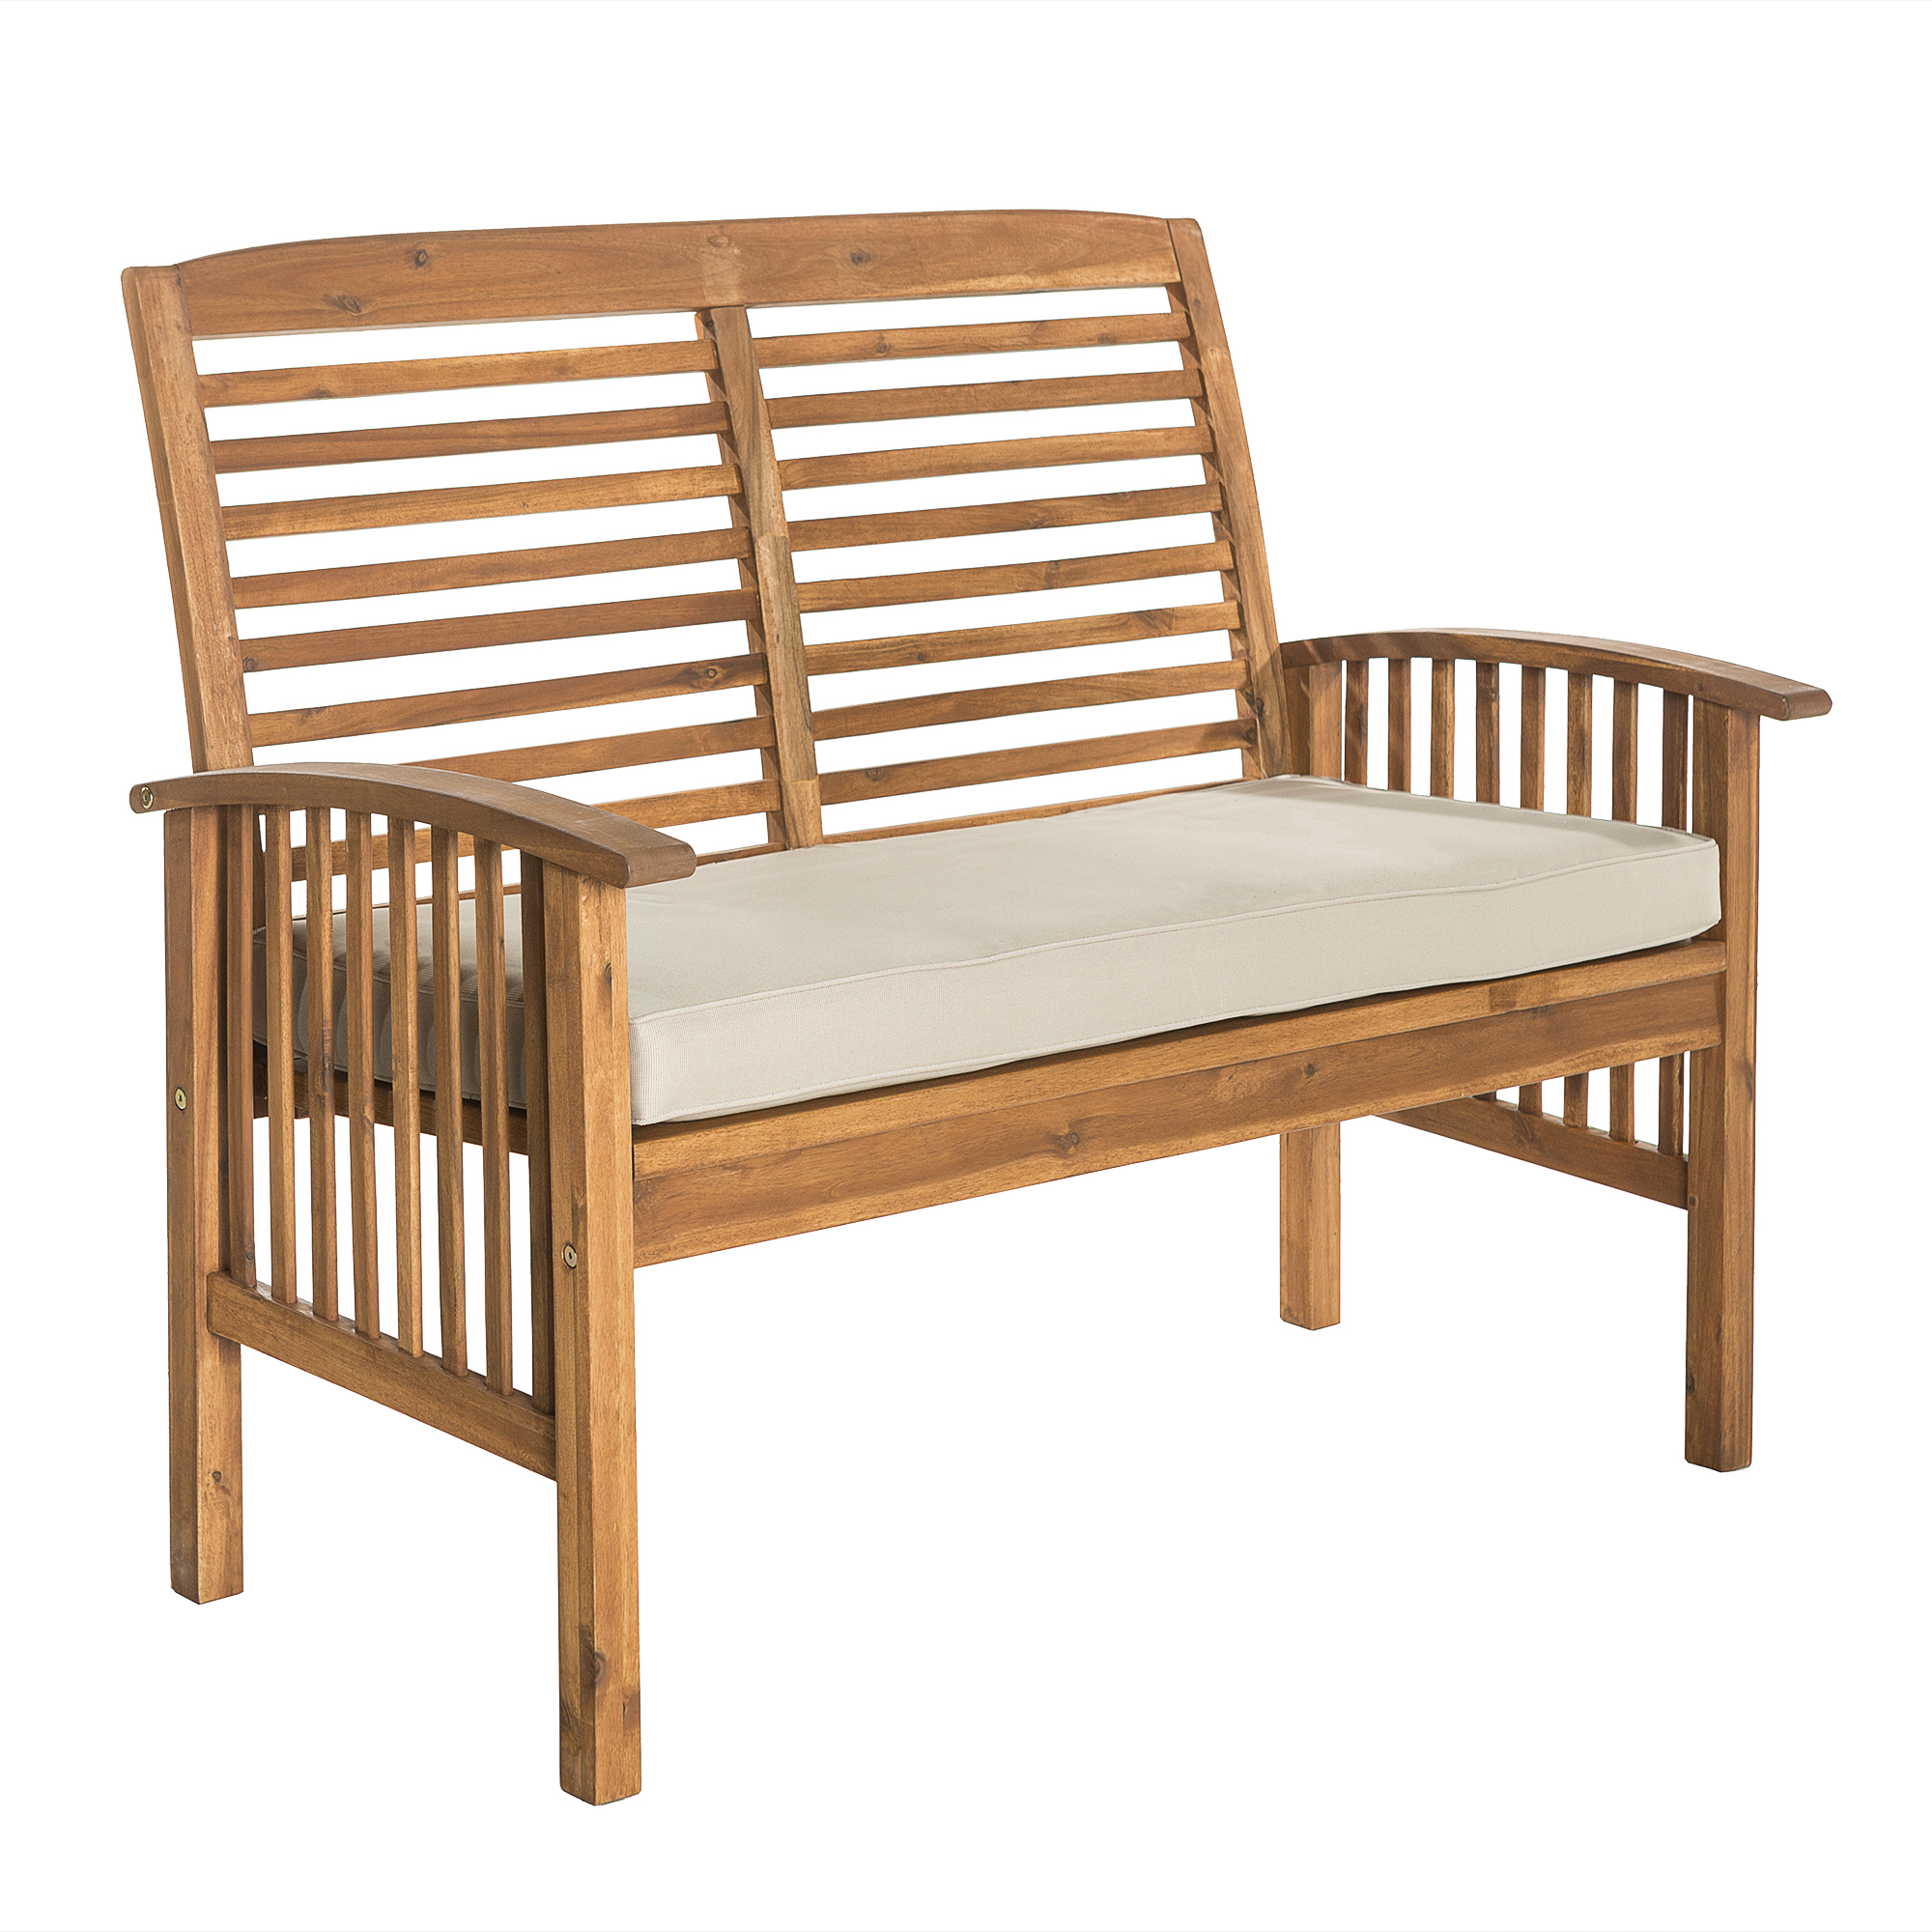 Walker Edison 48" Outdoor Patio Wood Loveseat With Cushions - Brown - image 5 of 8